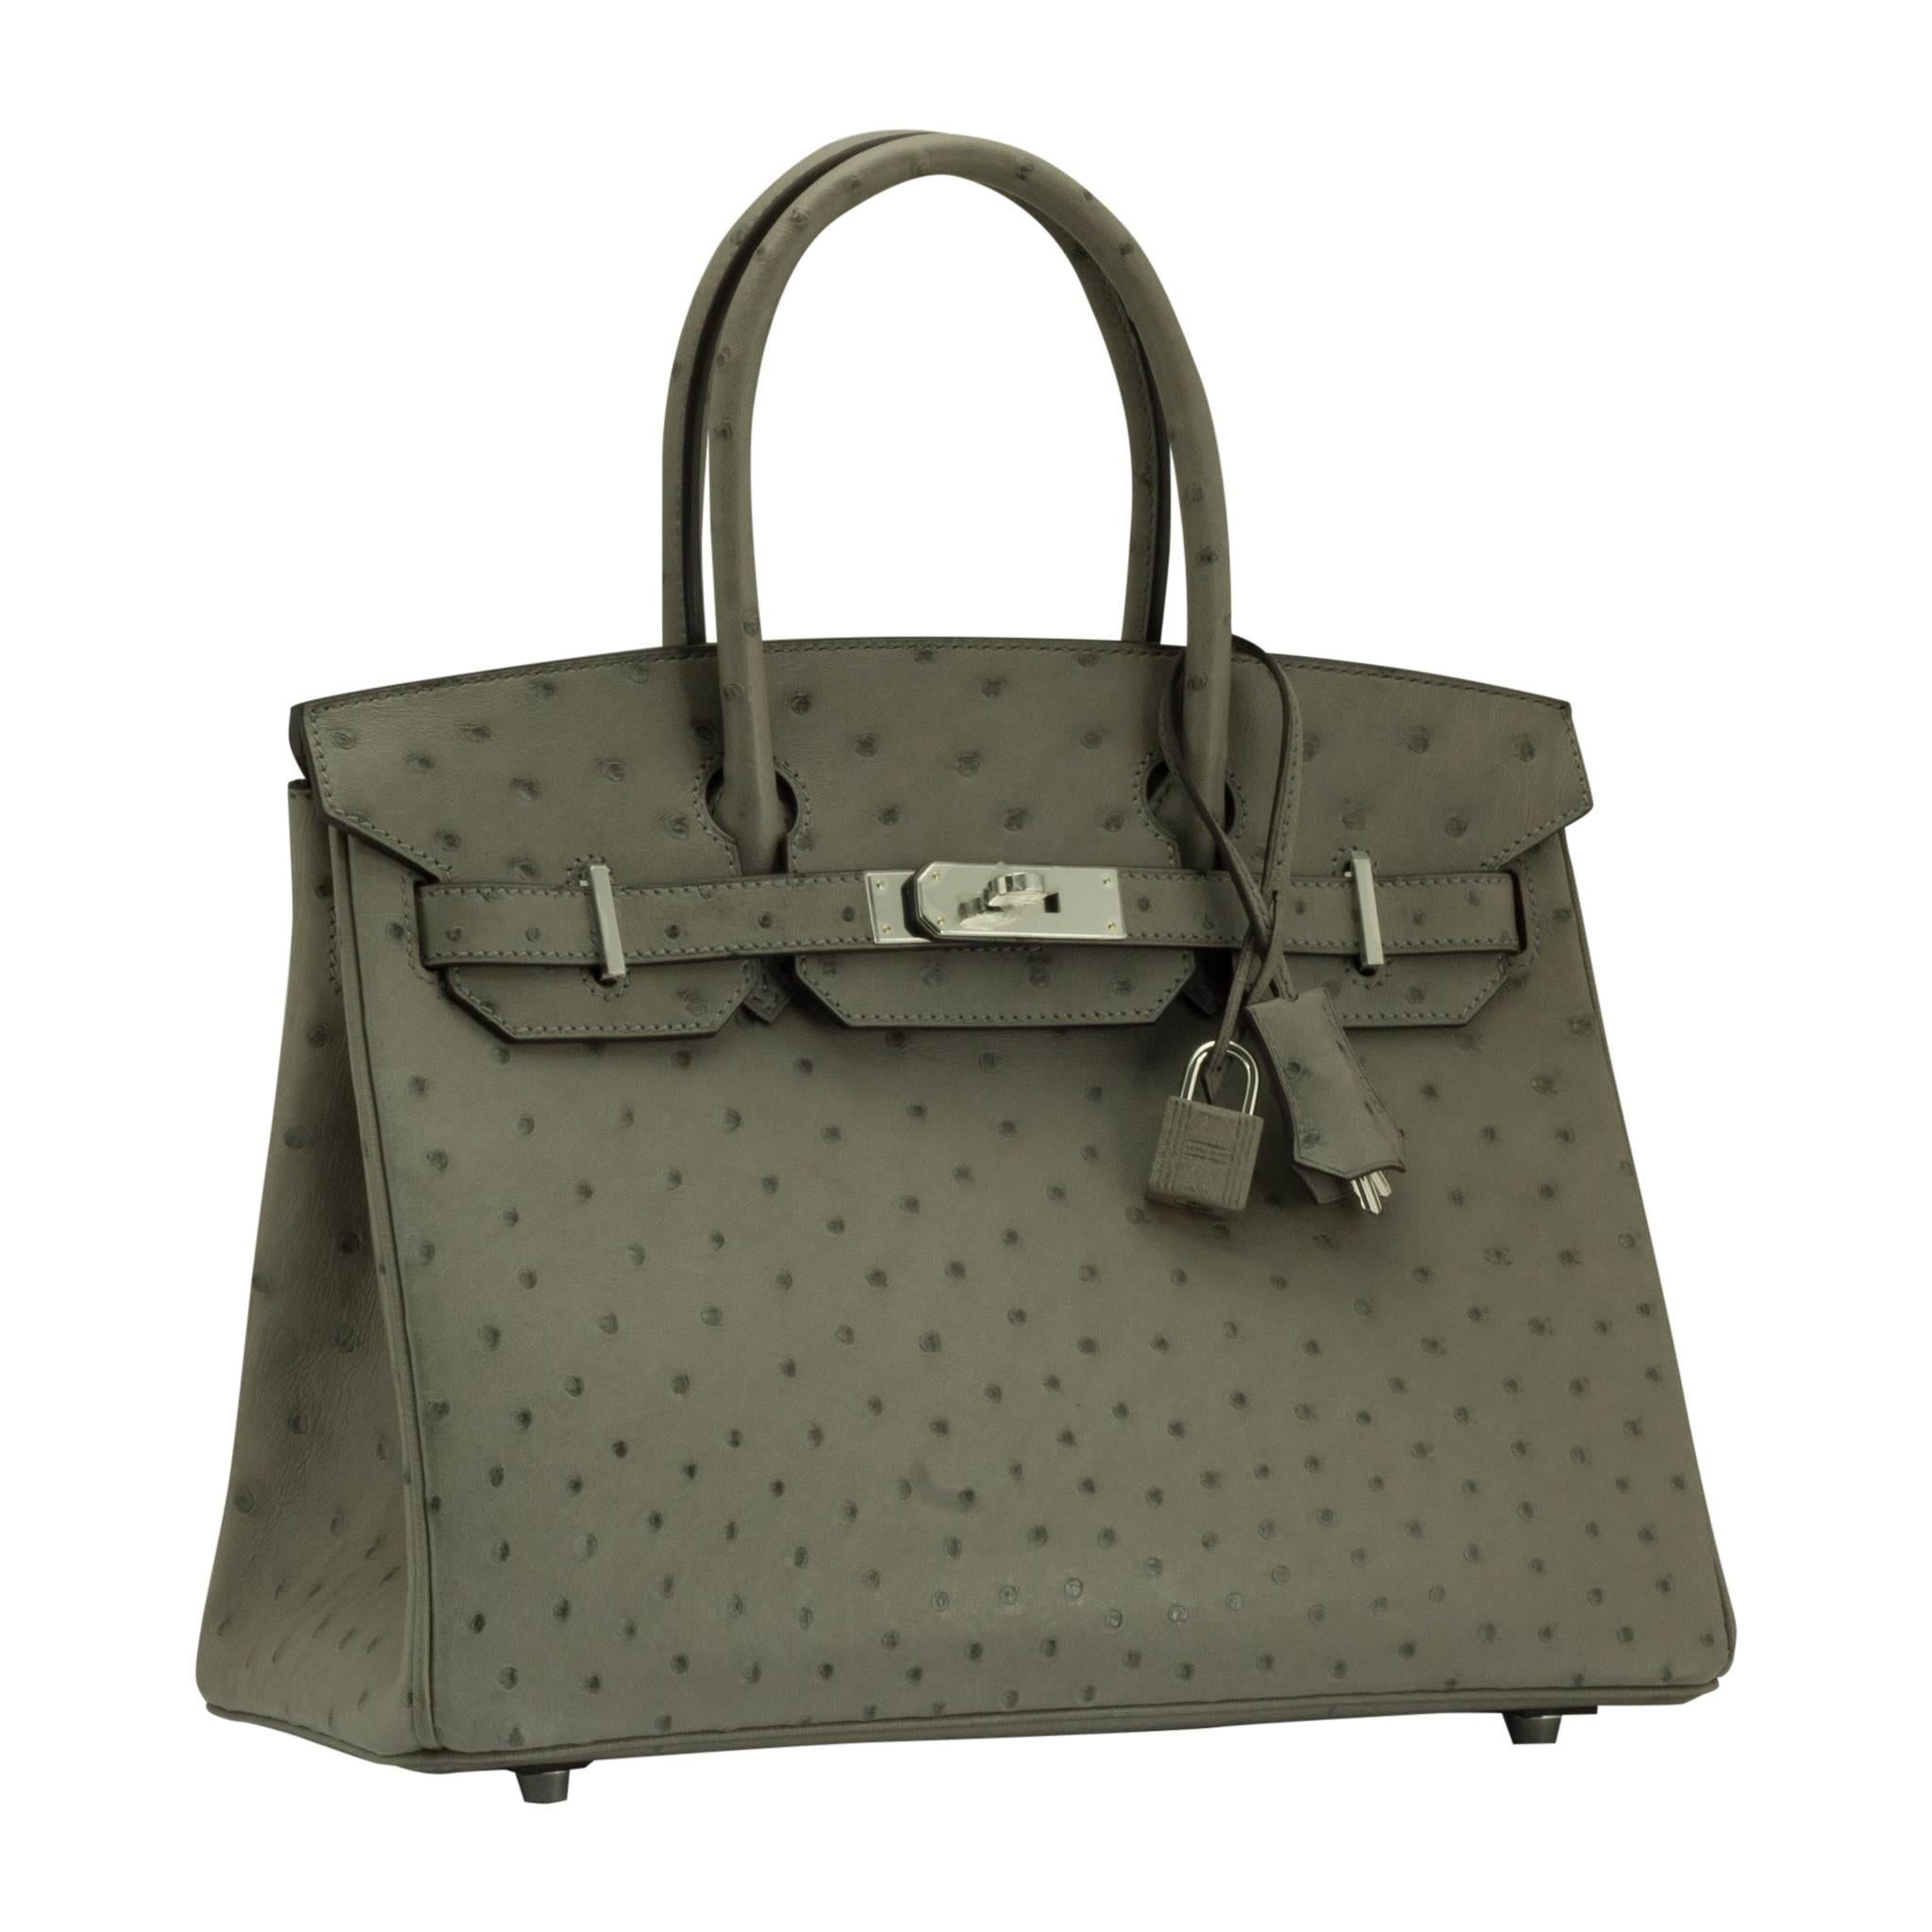 Hermes Birkin 30 Ostrich Leather 81 Grey Tourterelle Color PHW

Pristine condition. Pre-owned and never used

Bought it in Hermes store in 2017

Model: Birkin Bag

Composition: Ostrich leather

Color: Grey Tourterelle

Hardware: Palladium

Stamp: